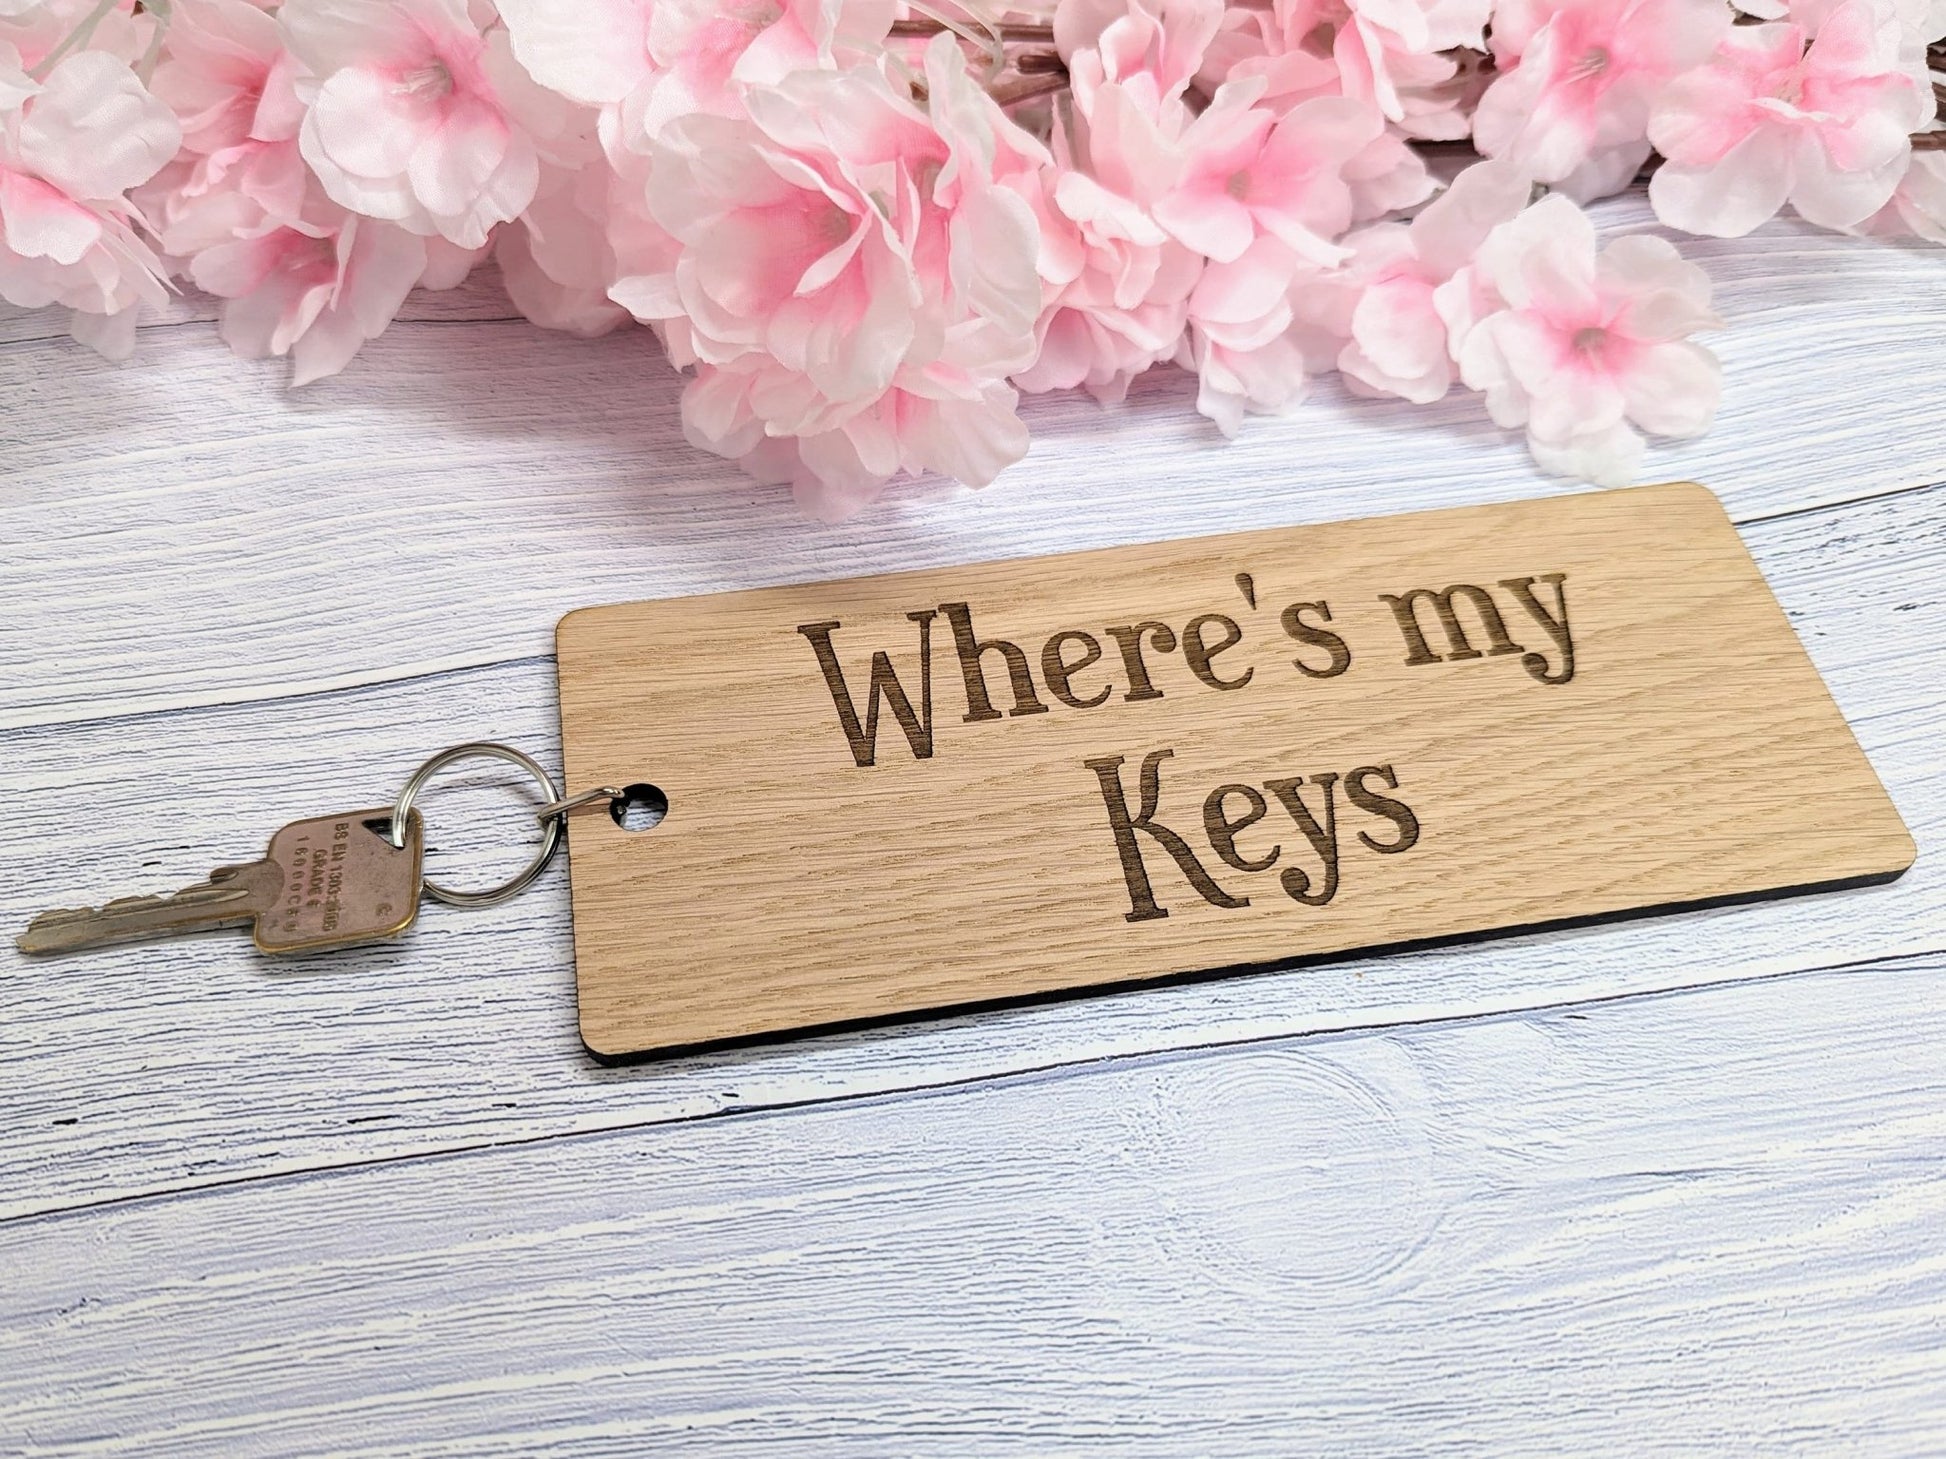 Extra-Large 200x80mm "Where's My Keys" Wooden Keyring - Ideal for First Car, New Home, or Those Who Misplace Keys - CherryGroveCraft